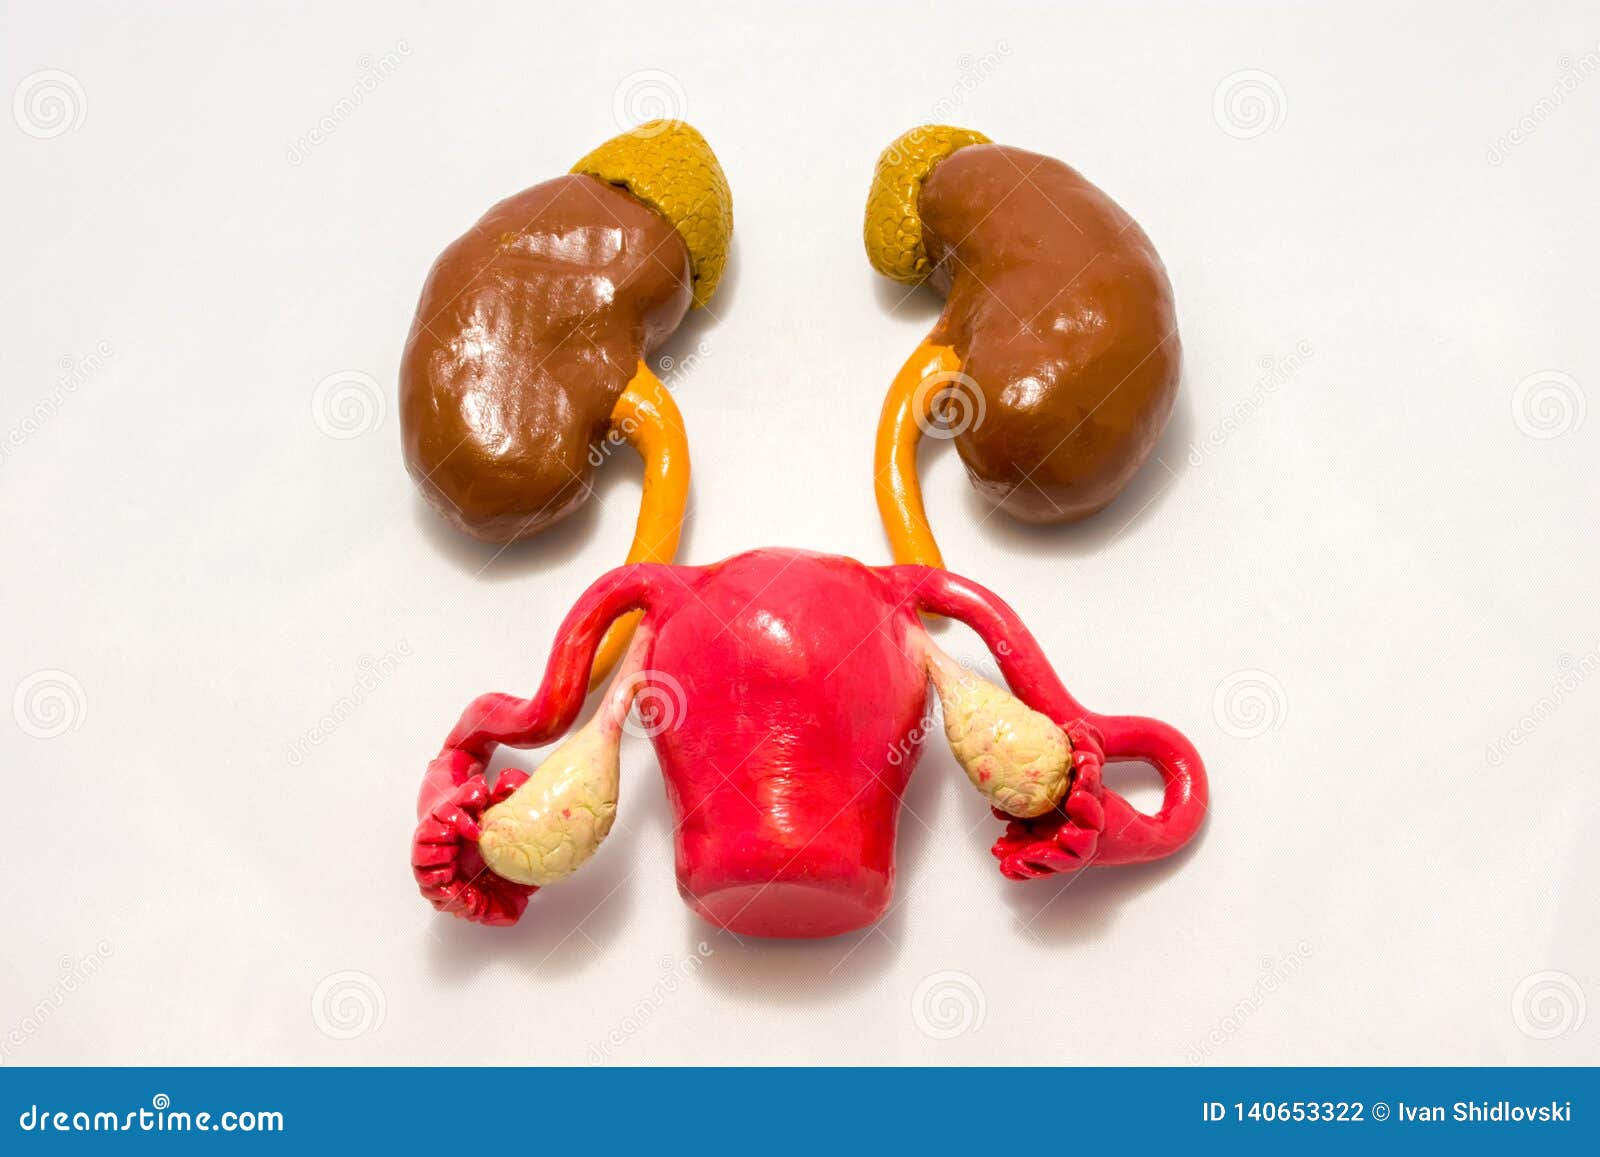 kidney and female sex or genital organs - uterus with ovaries one above the other. anatomy, physiology, interaction, state of preg